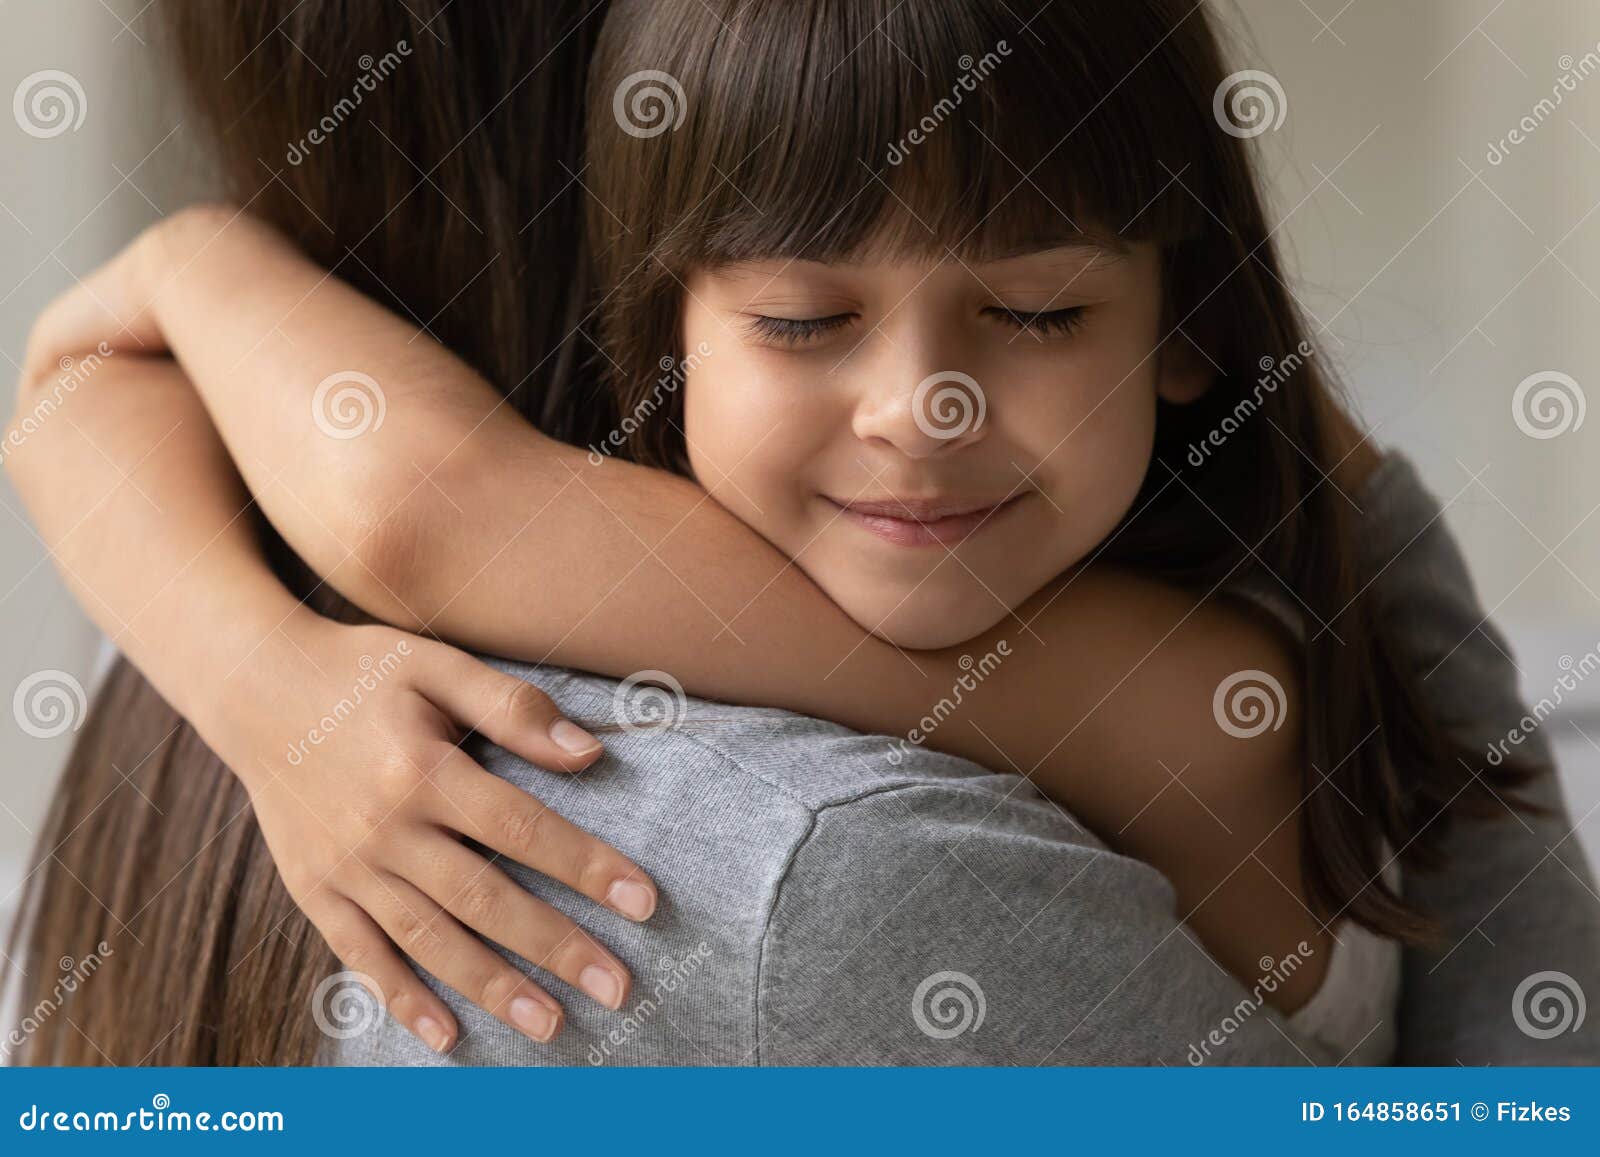 close up face of daughter cuddle her mother heartfelt moment